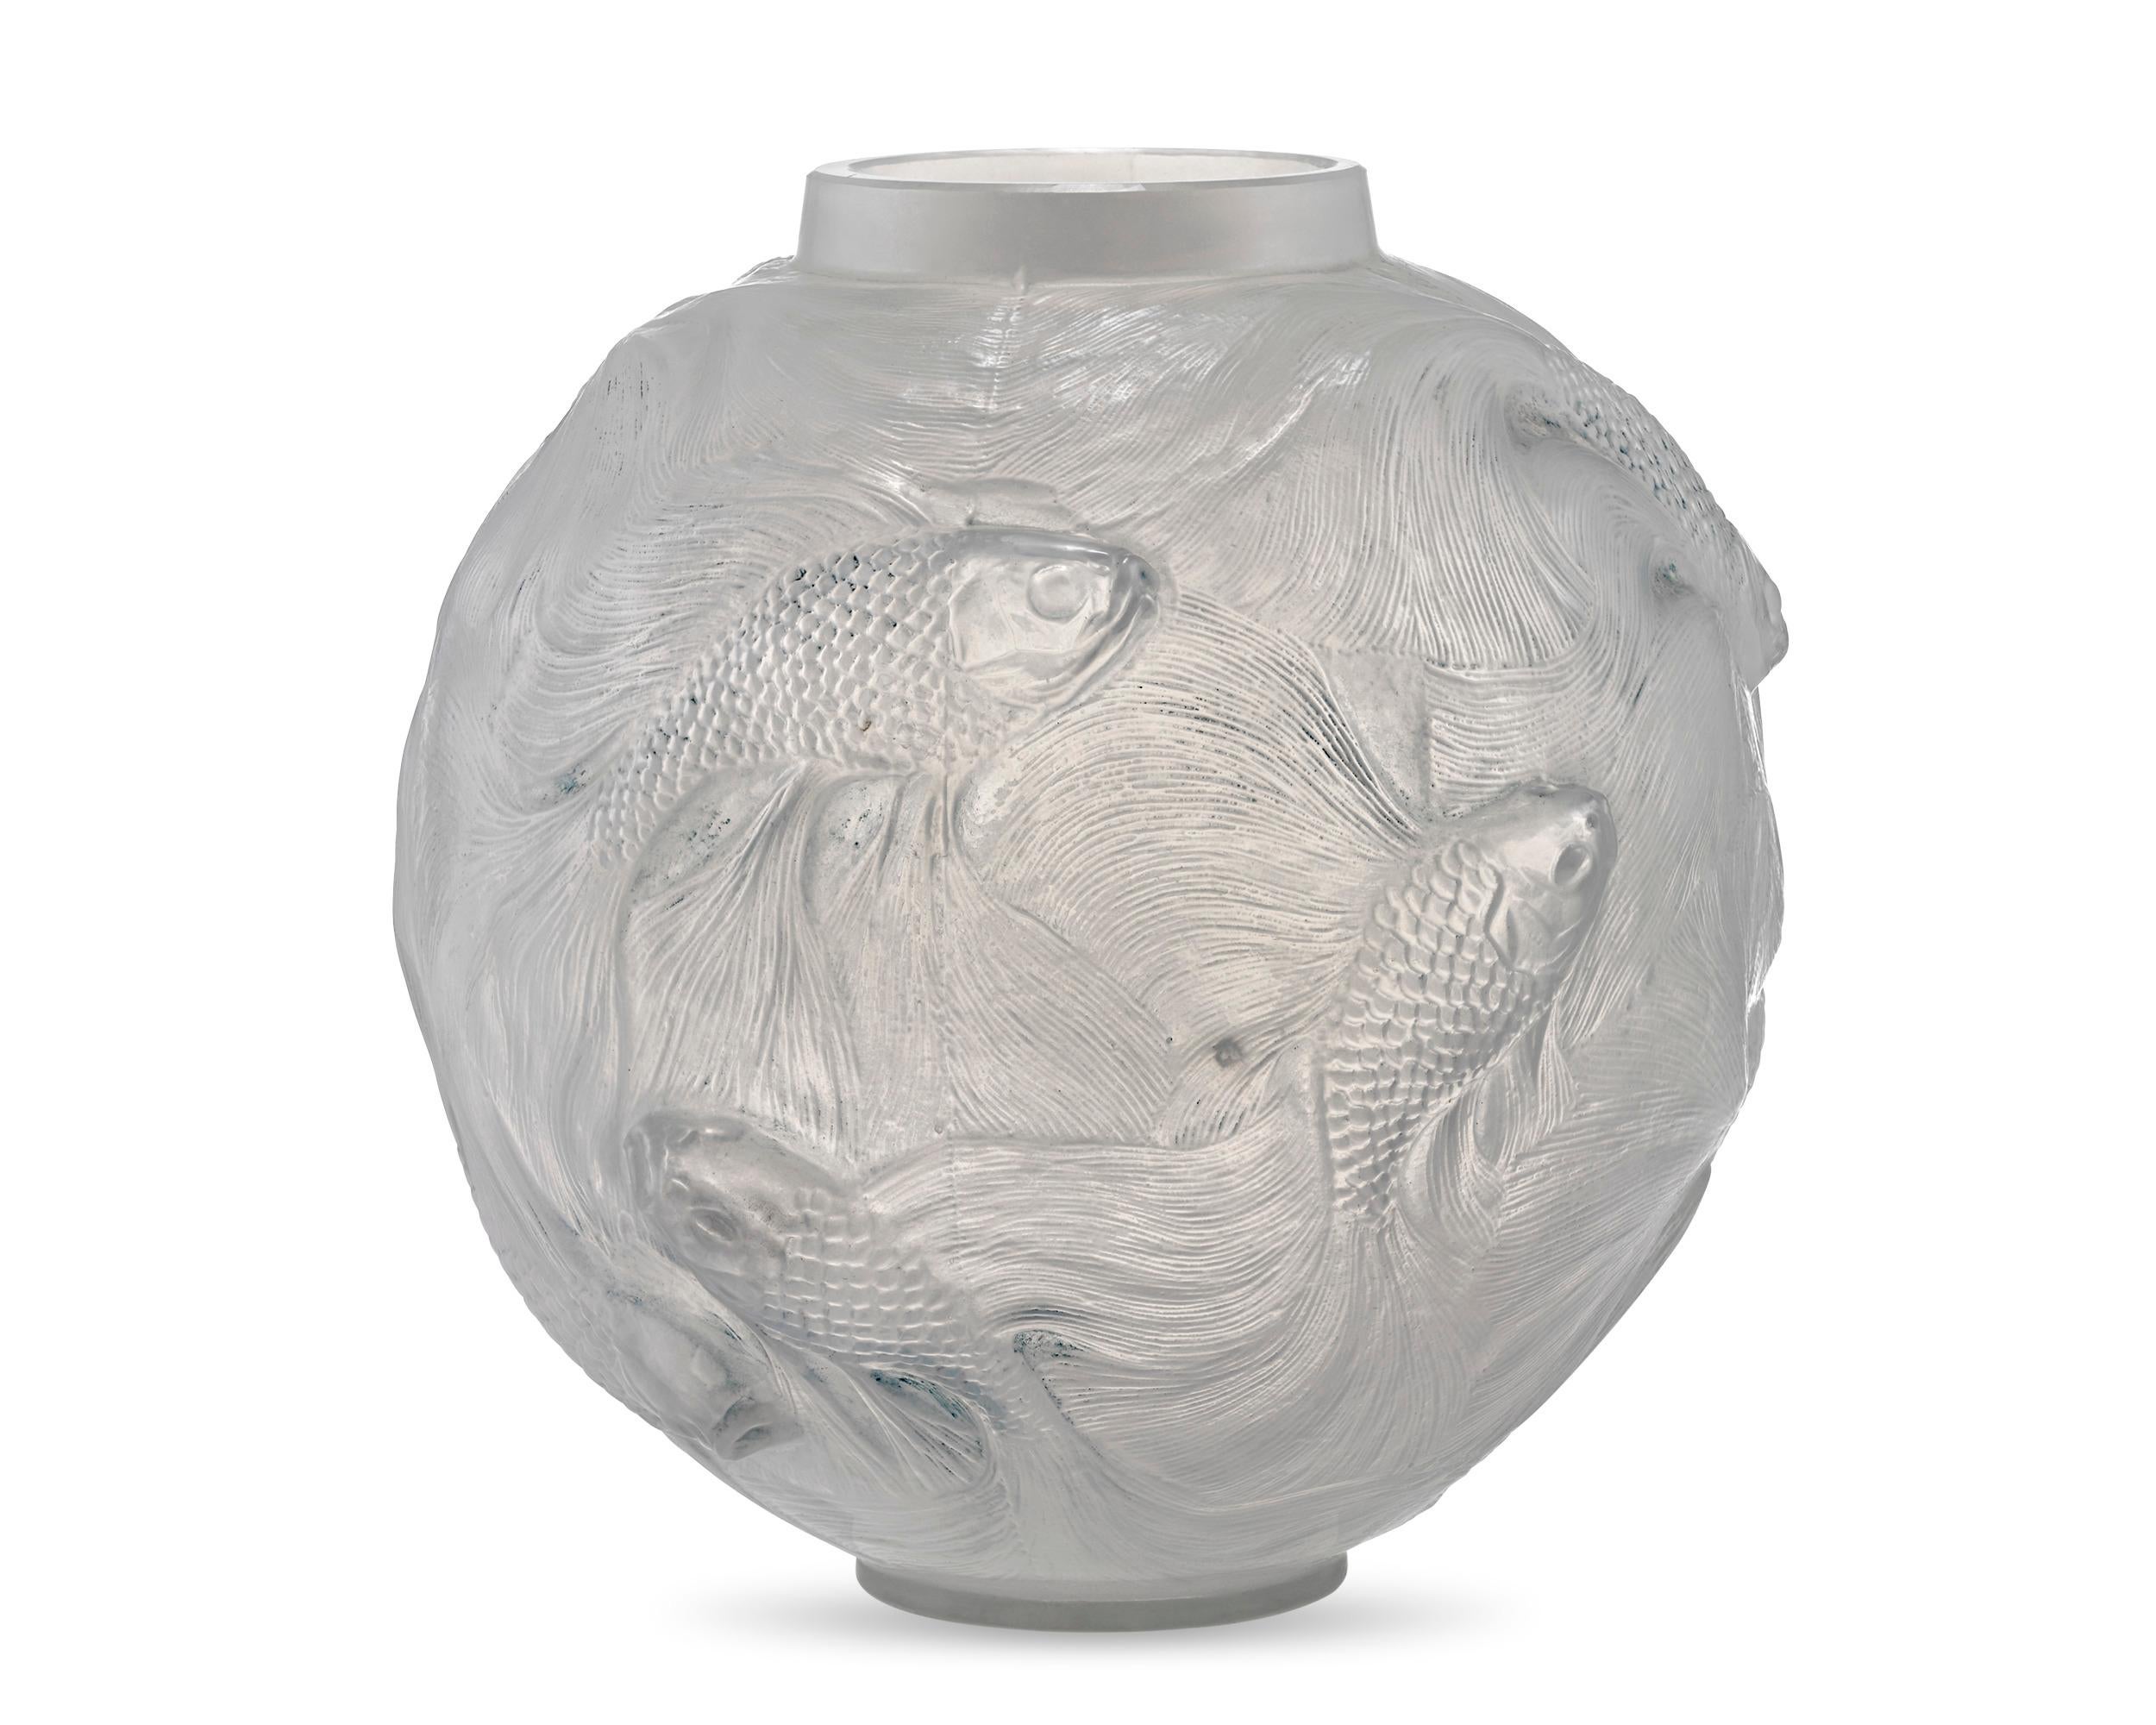 The work of famed French glass master René Lalique, this dynamic vase is crafted in the rare and intricate Formose pattern. Conceived in 1924 during the height of Art Deco, its spherical design is formed from both clear and frosted glass that